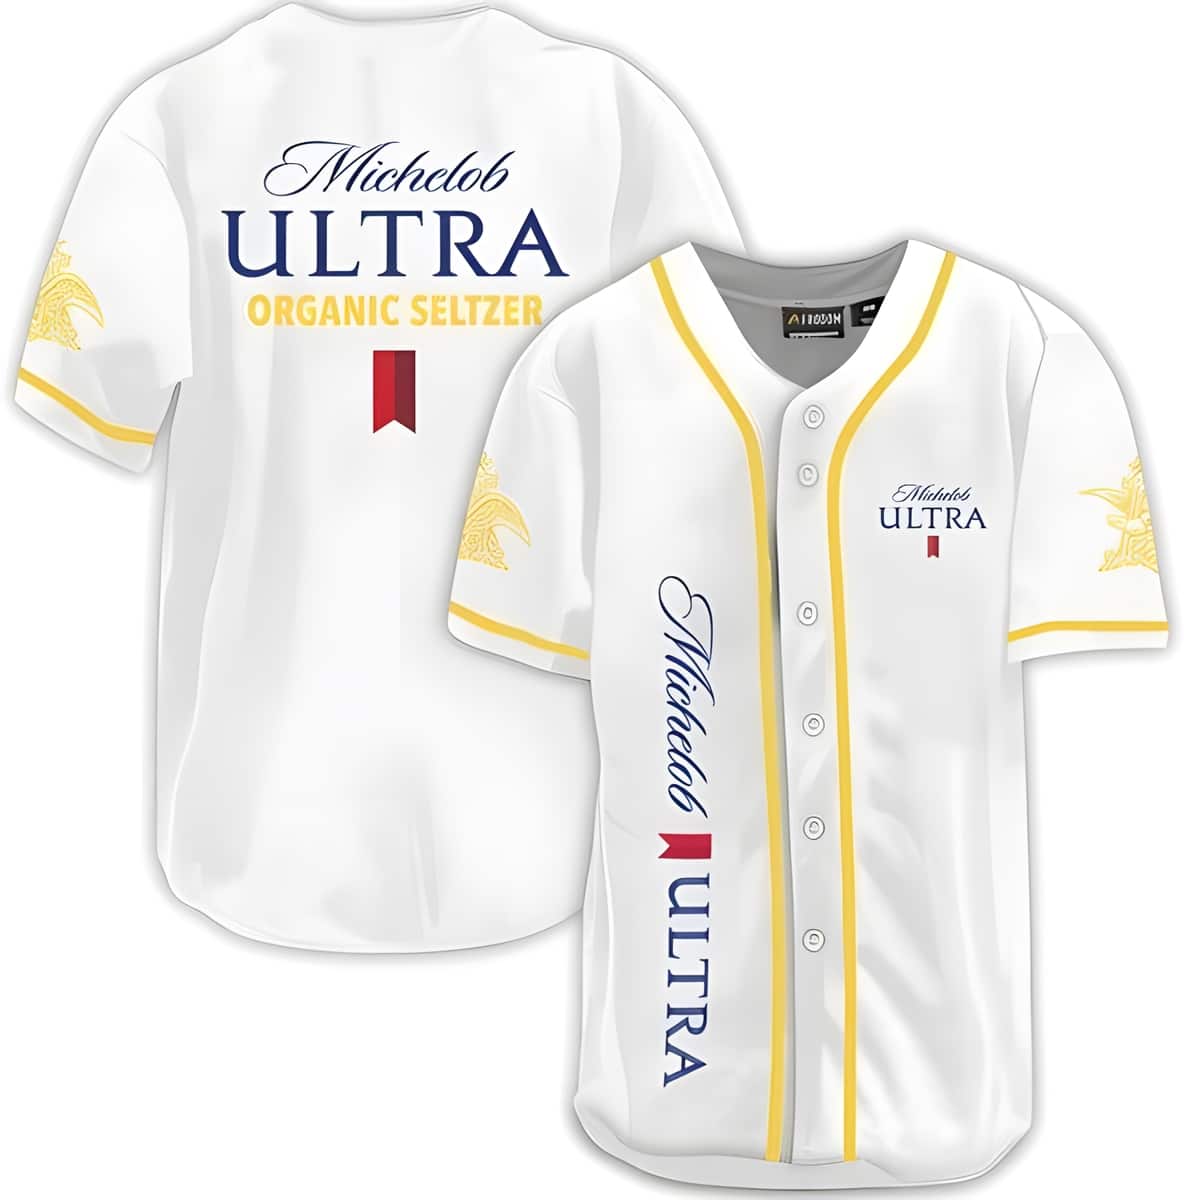 Michelob ULTRA Organic Seltzer Baseball Jersey Yellow Striped Pattern Spicy Pineapple Beer Lovers Gift